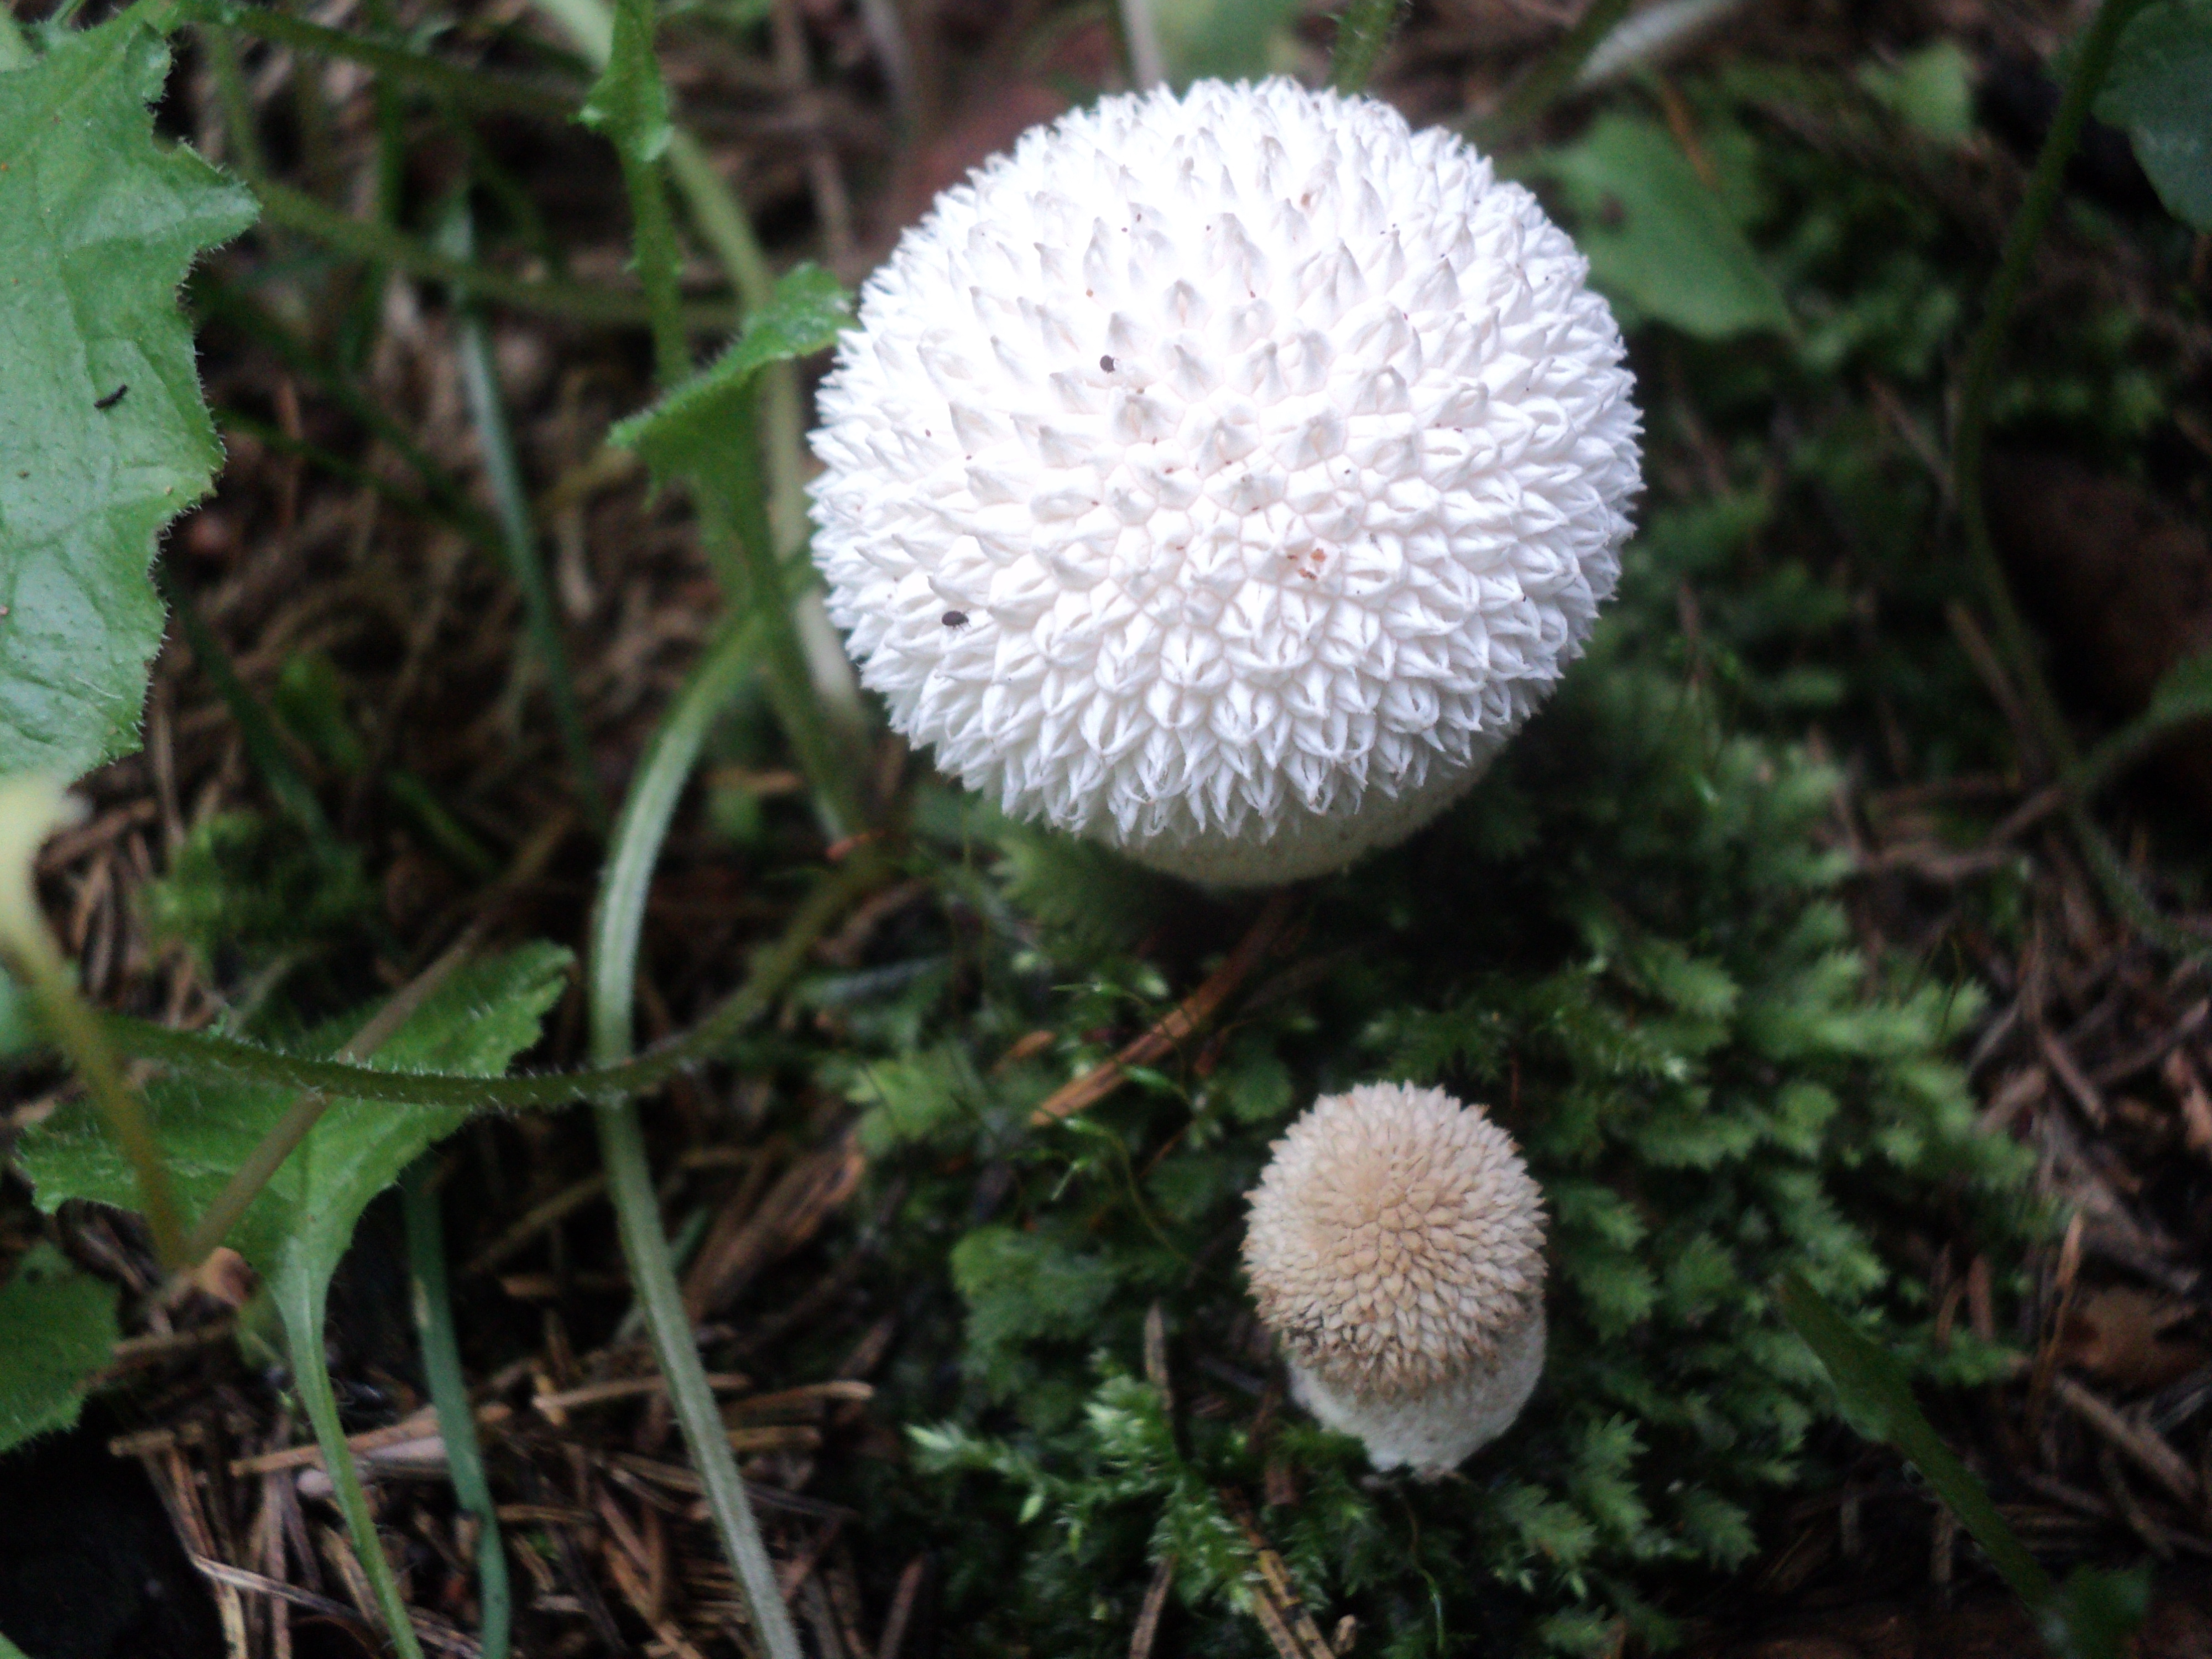 Lycoperdon curtisii (Curtis's Puffball)